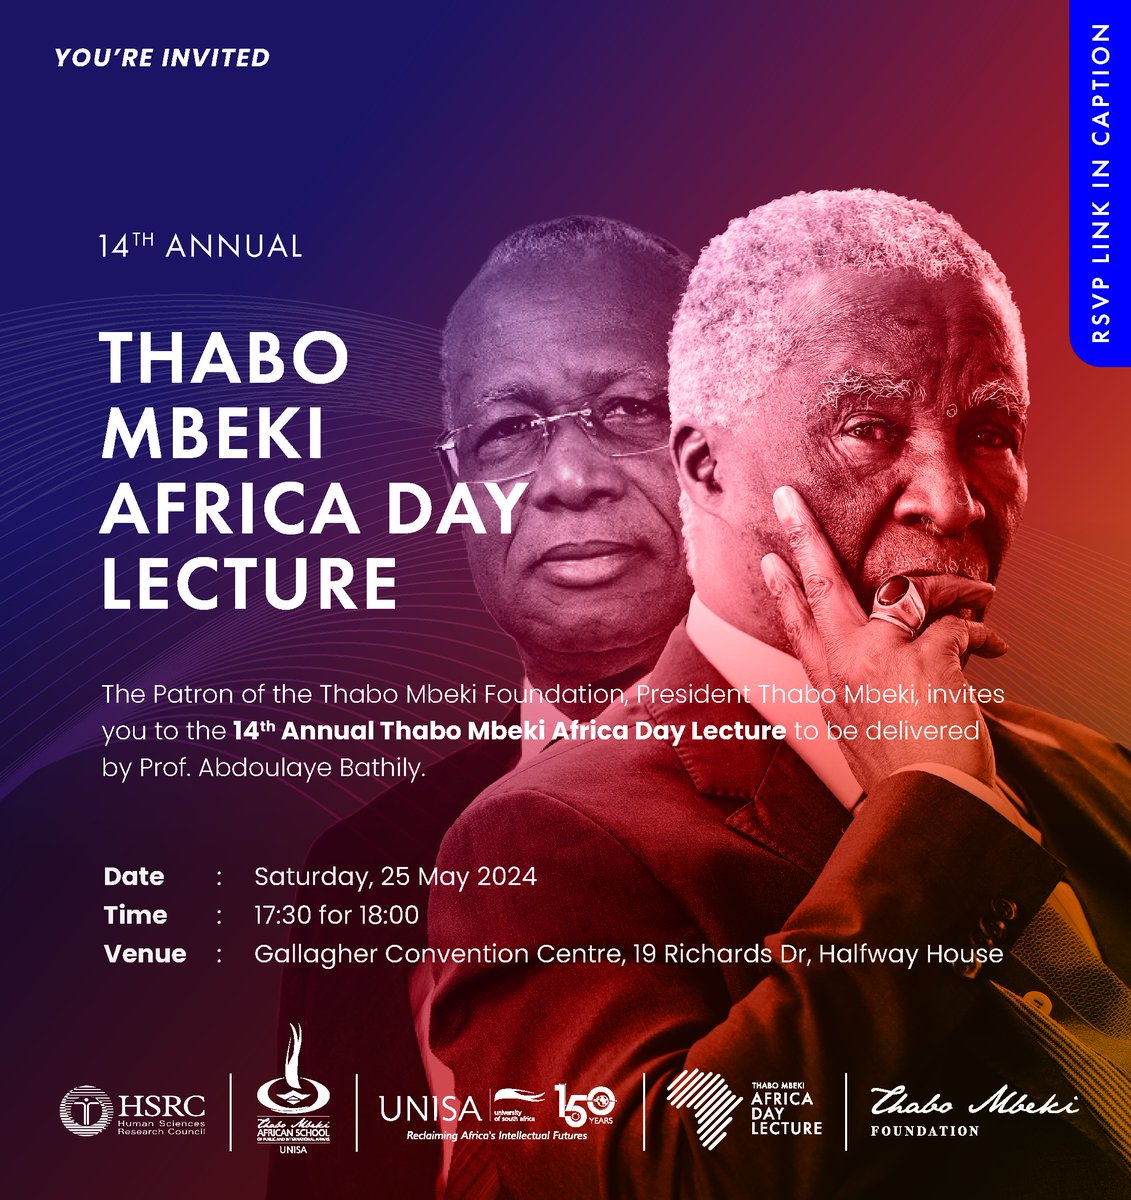 The 14th Thabo Mbeki Africa Day Lecture will be delivered by Professor Abdoulaye Bathily. Theme: “The New International Scramble for Africa and the Challenges of Unity.” 📅: 25 May 2024 ⏲️: 17:30 for 18:00 🏟️: Gallagher Convention Centre Register here: rb.gy/9yzcx6